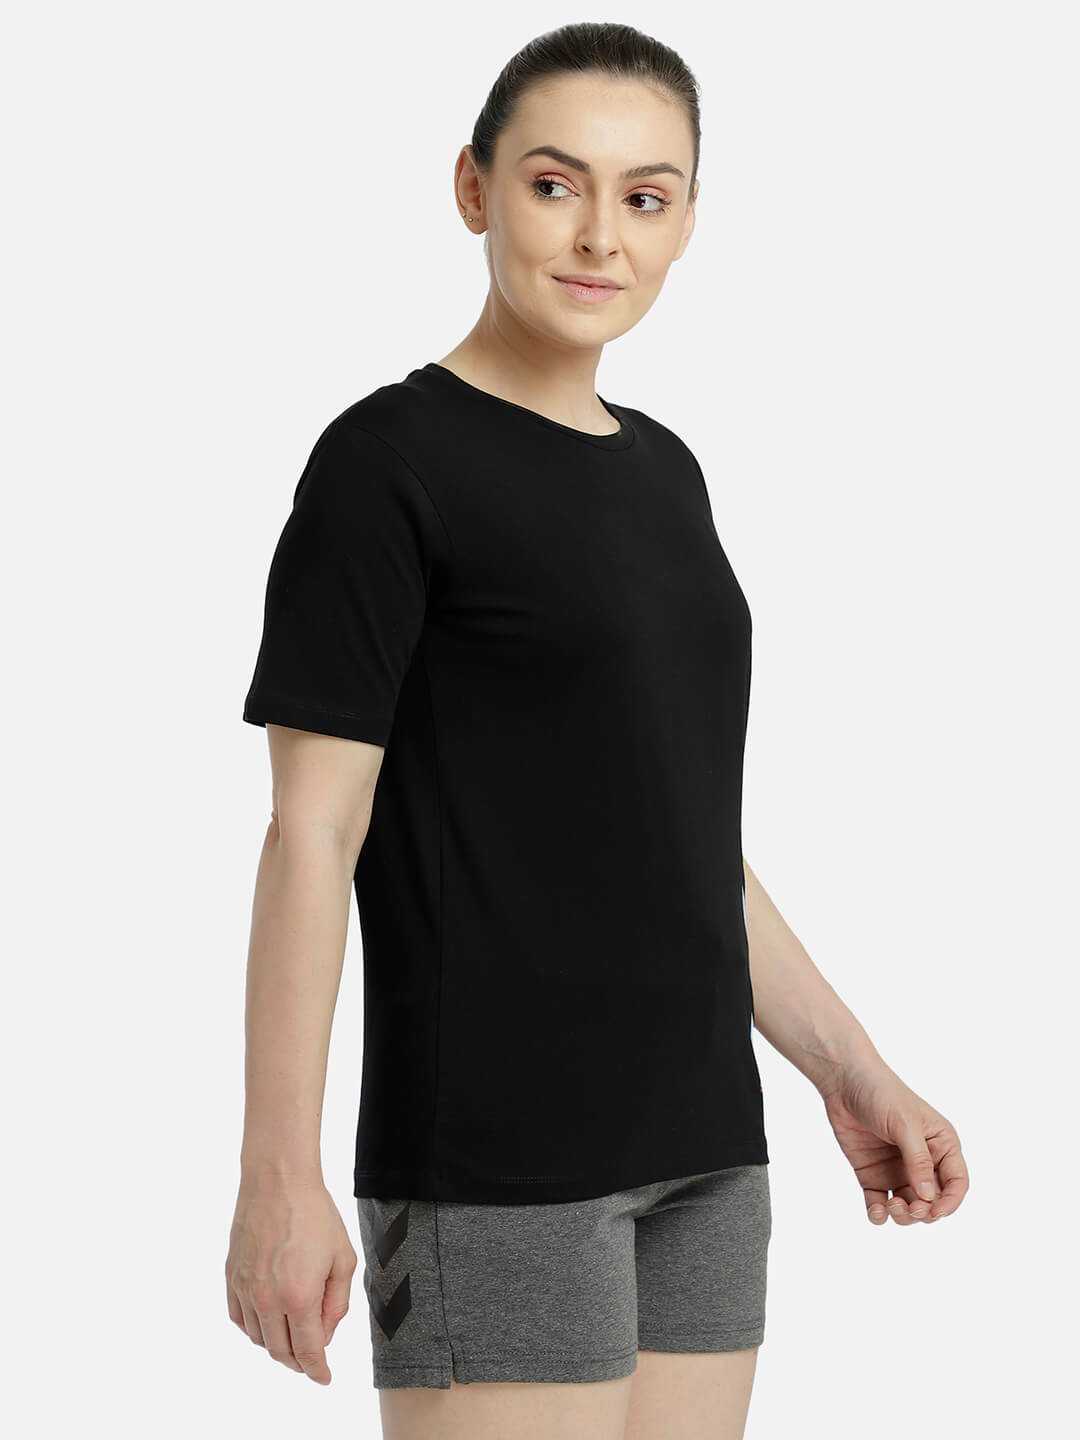 Tany Round Neck Black T-Shirt for Women